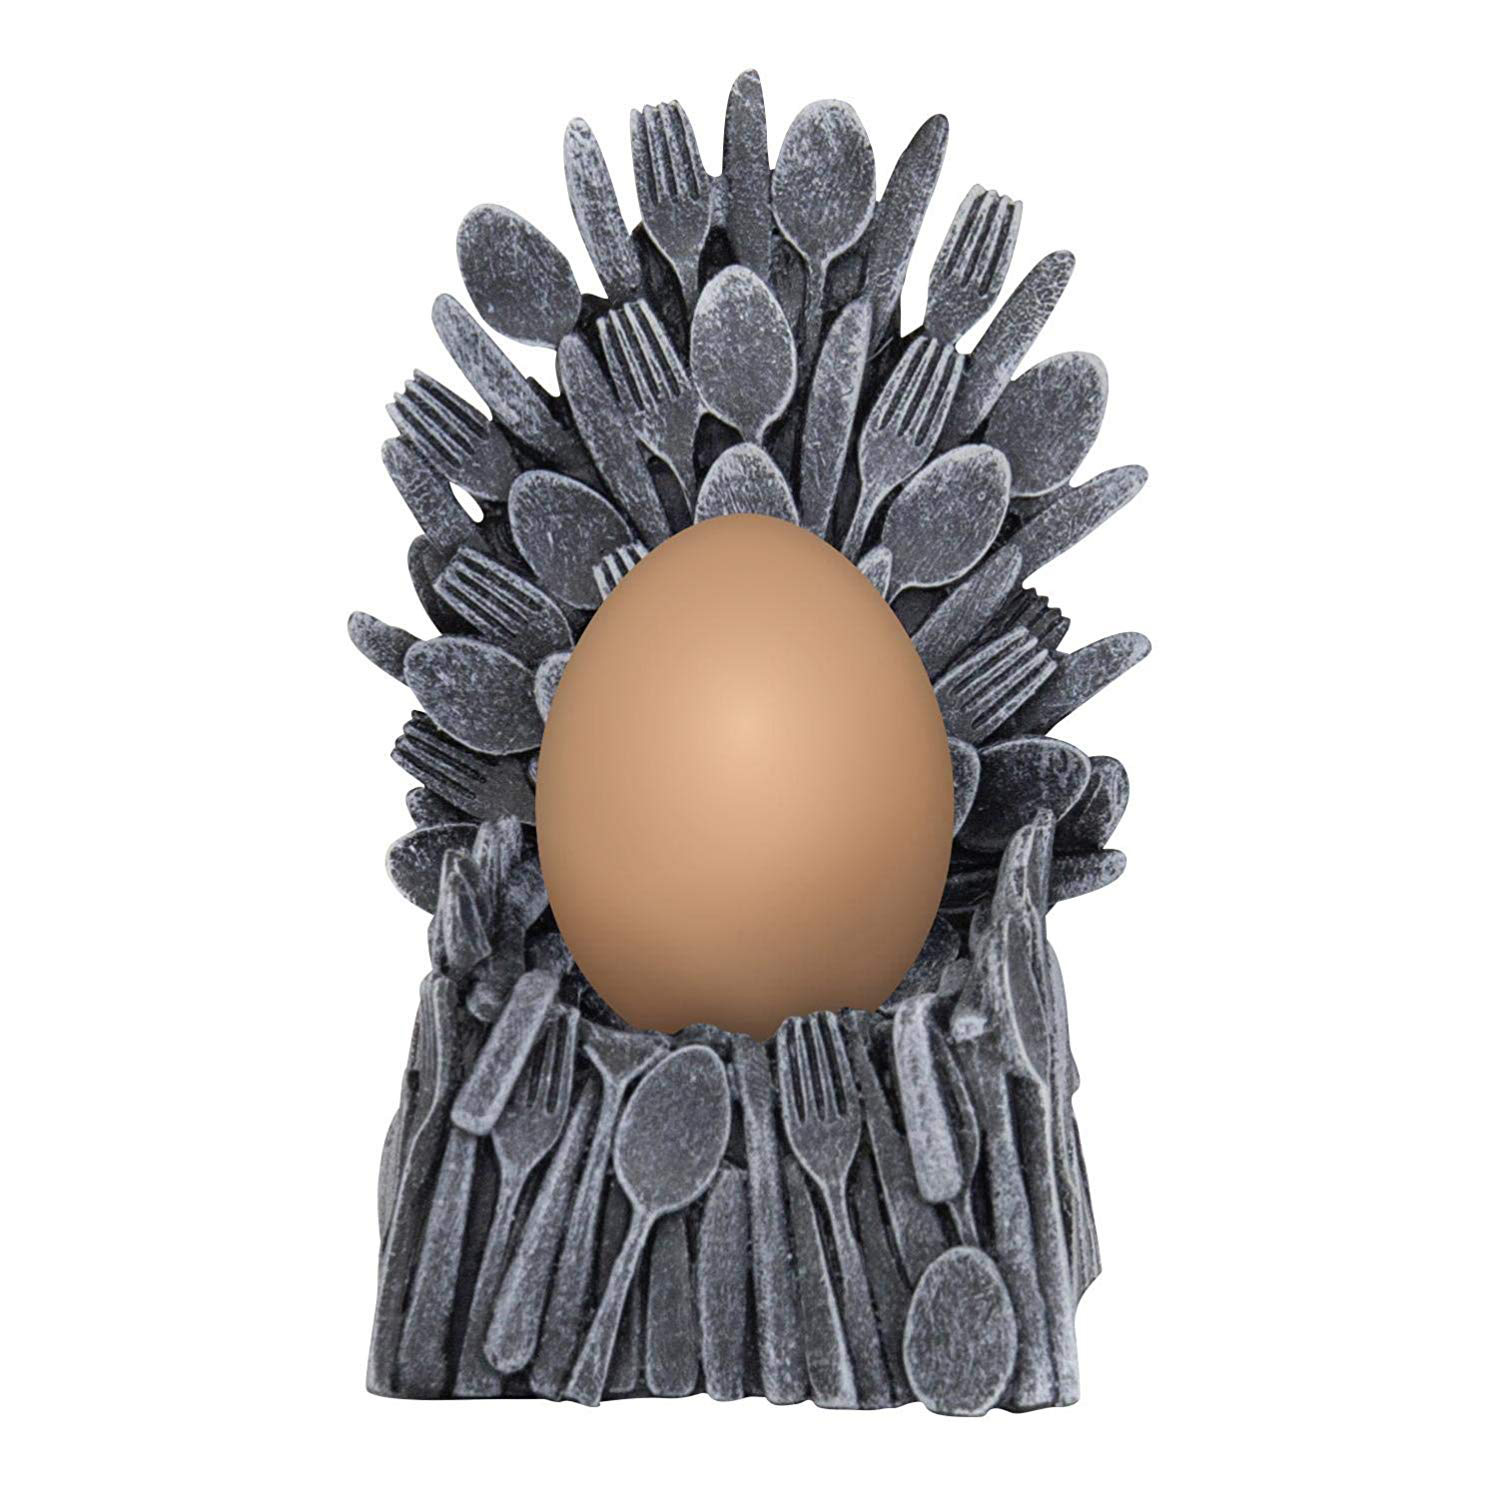 Egg Of Thrones Cup Game Of Thrones Style Iron Chair GOT Novelty Gift Replica